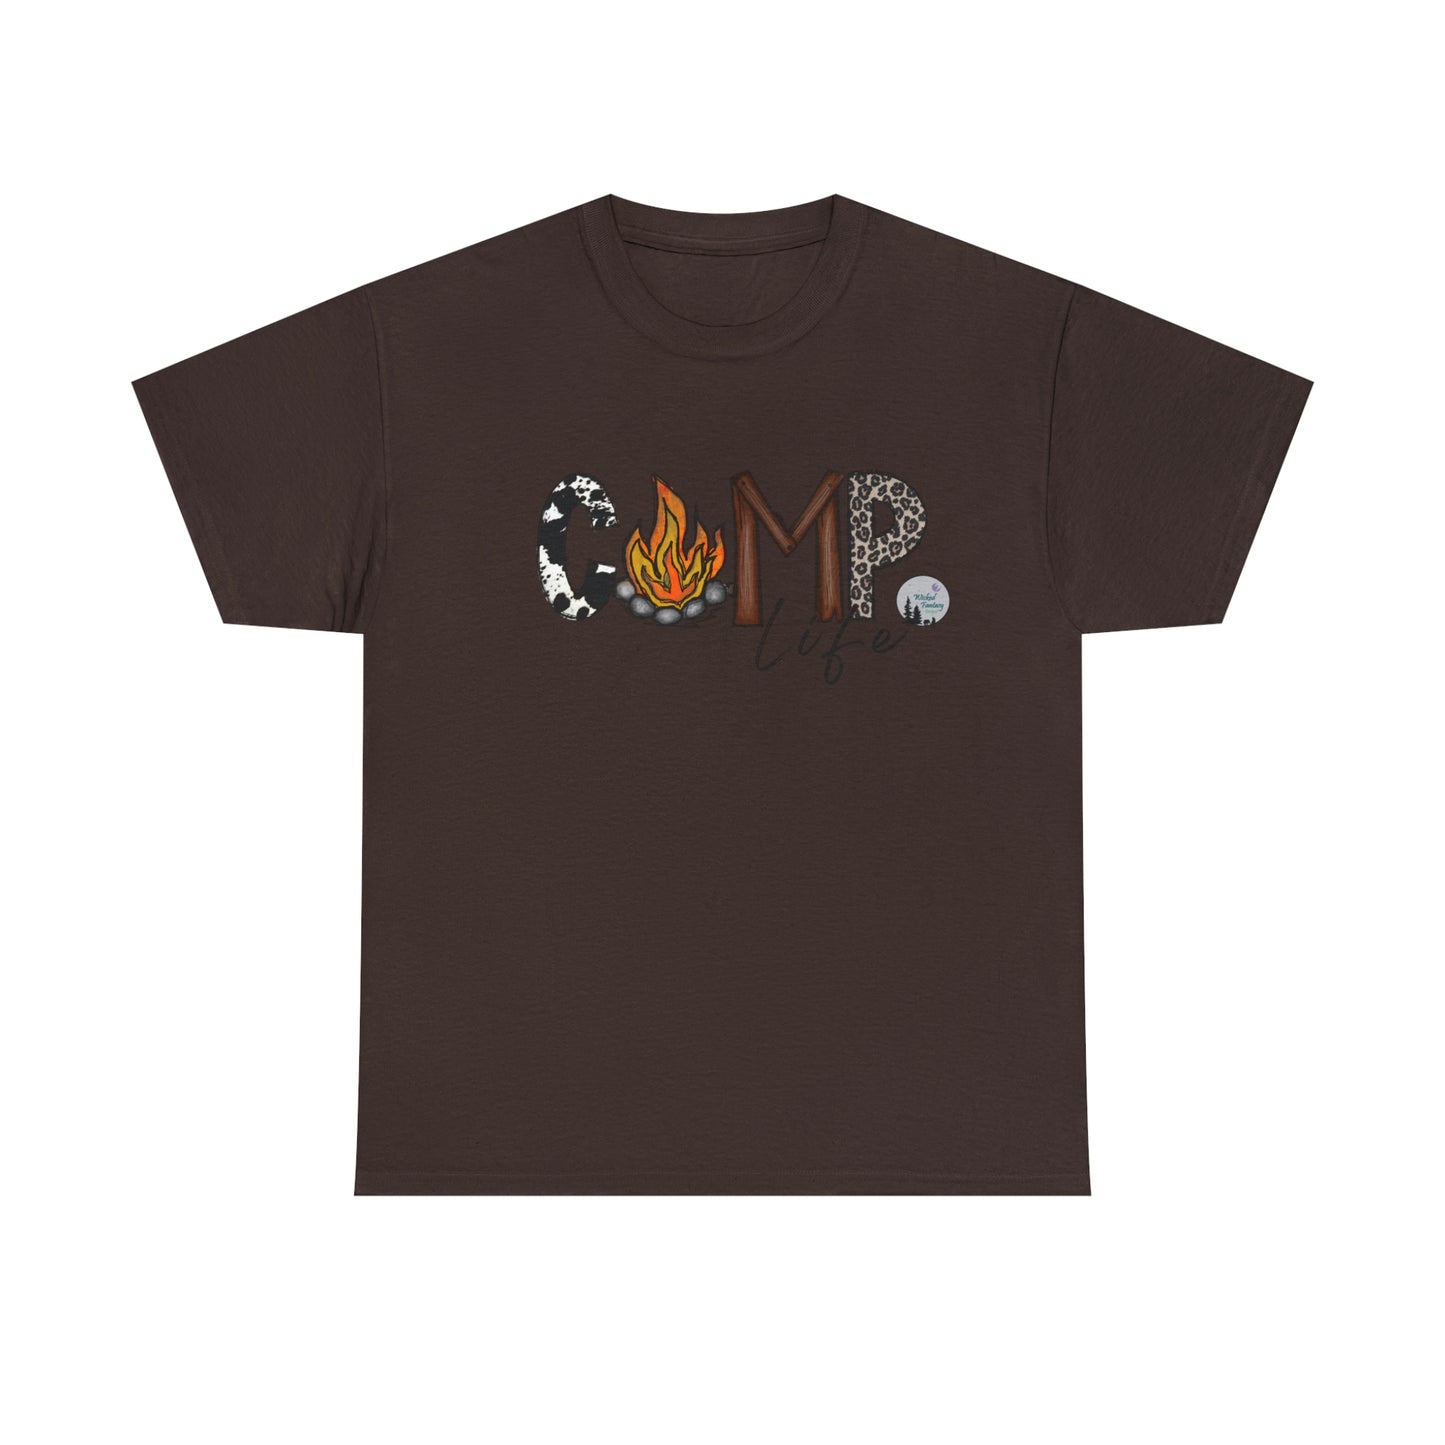 Camp Life Cowhide Campfire Leopard Print Edgy Cute Heavy Cotton Tee